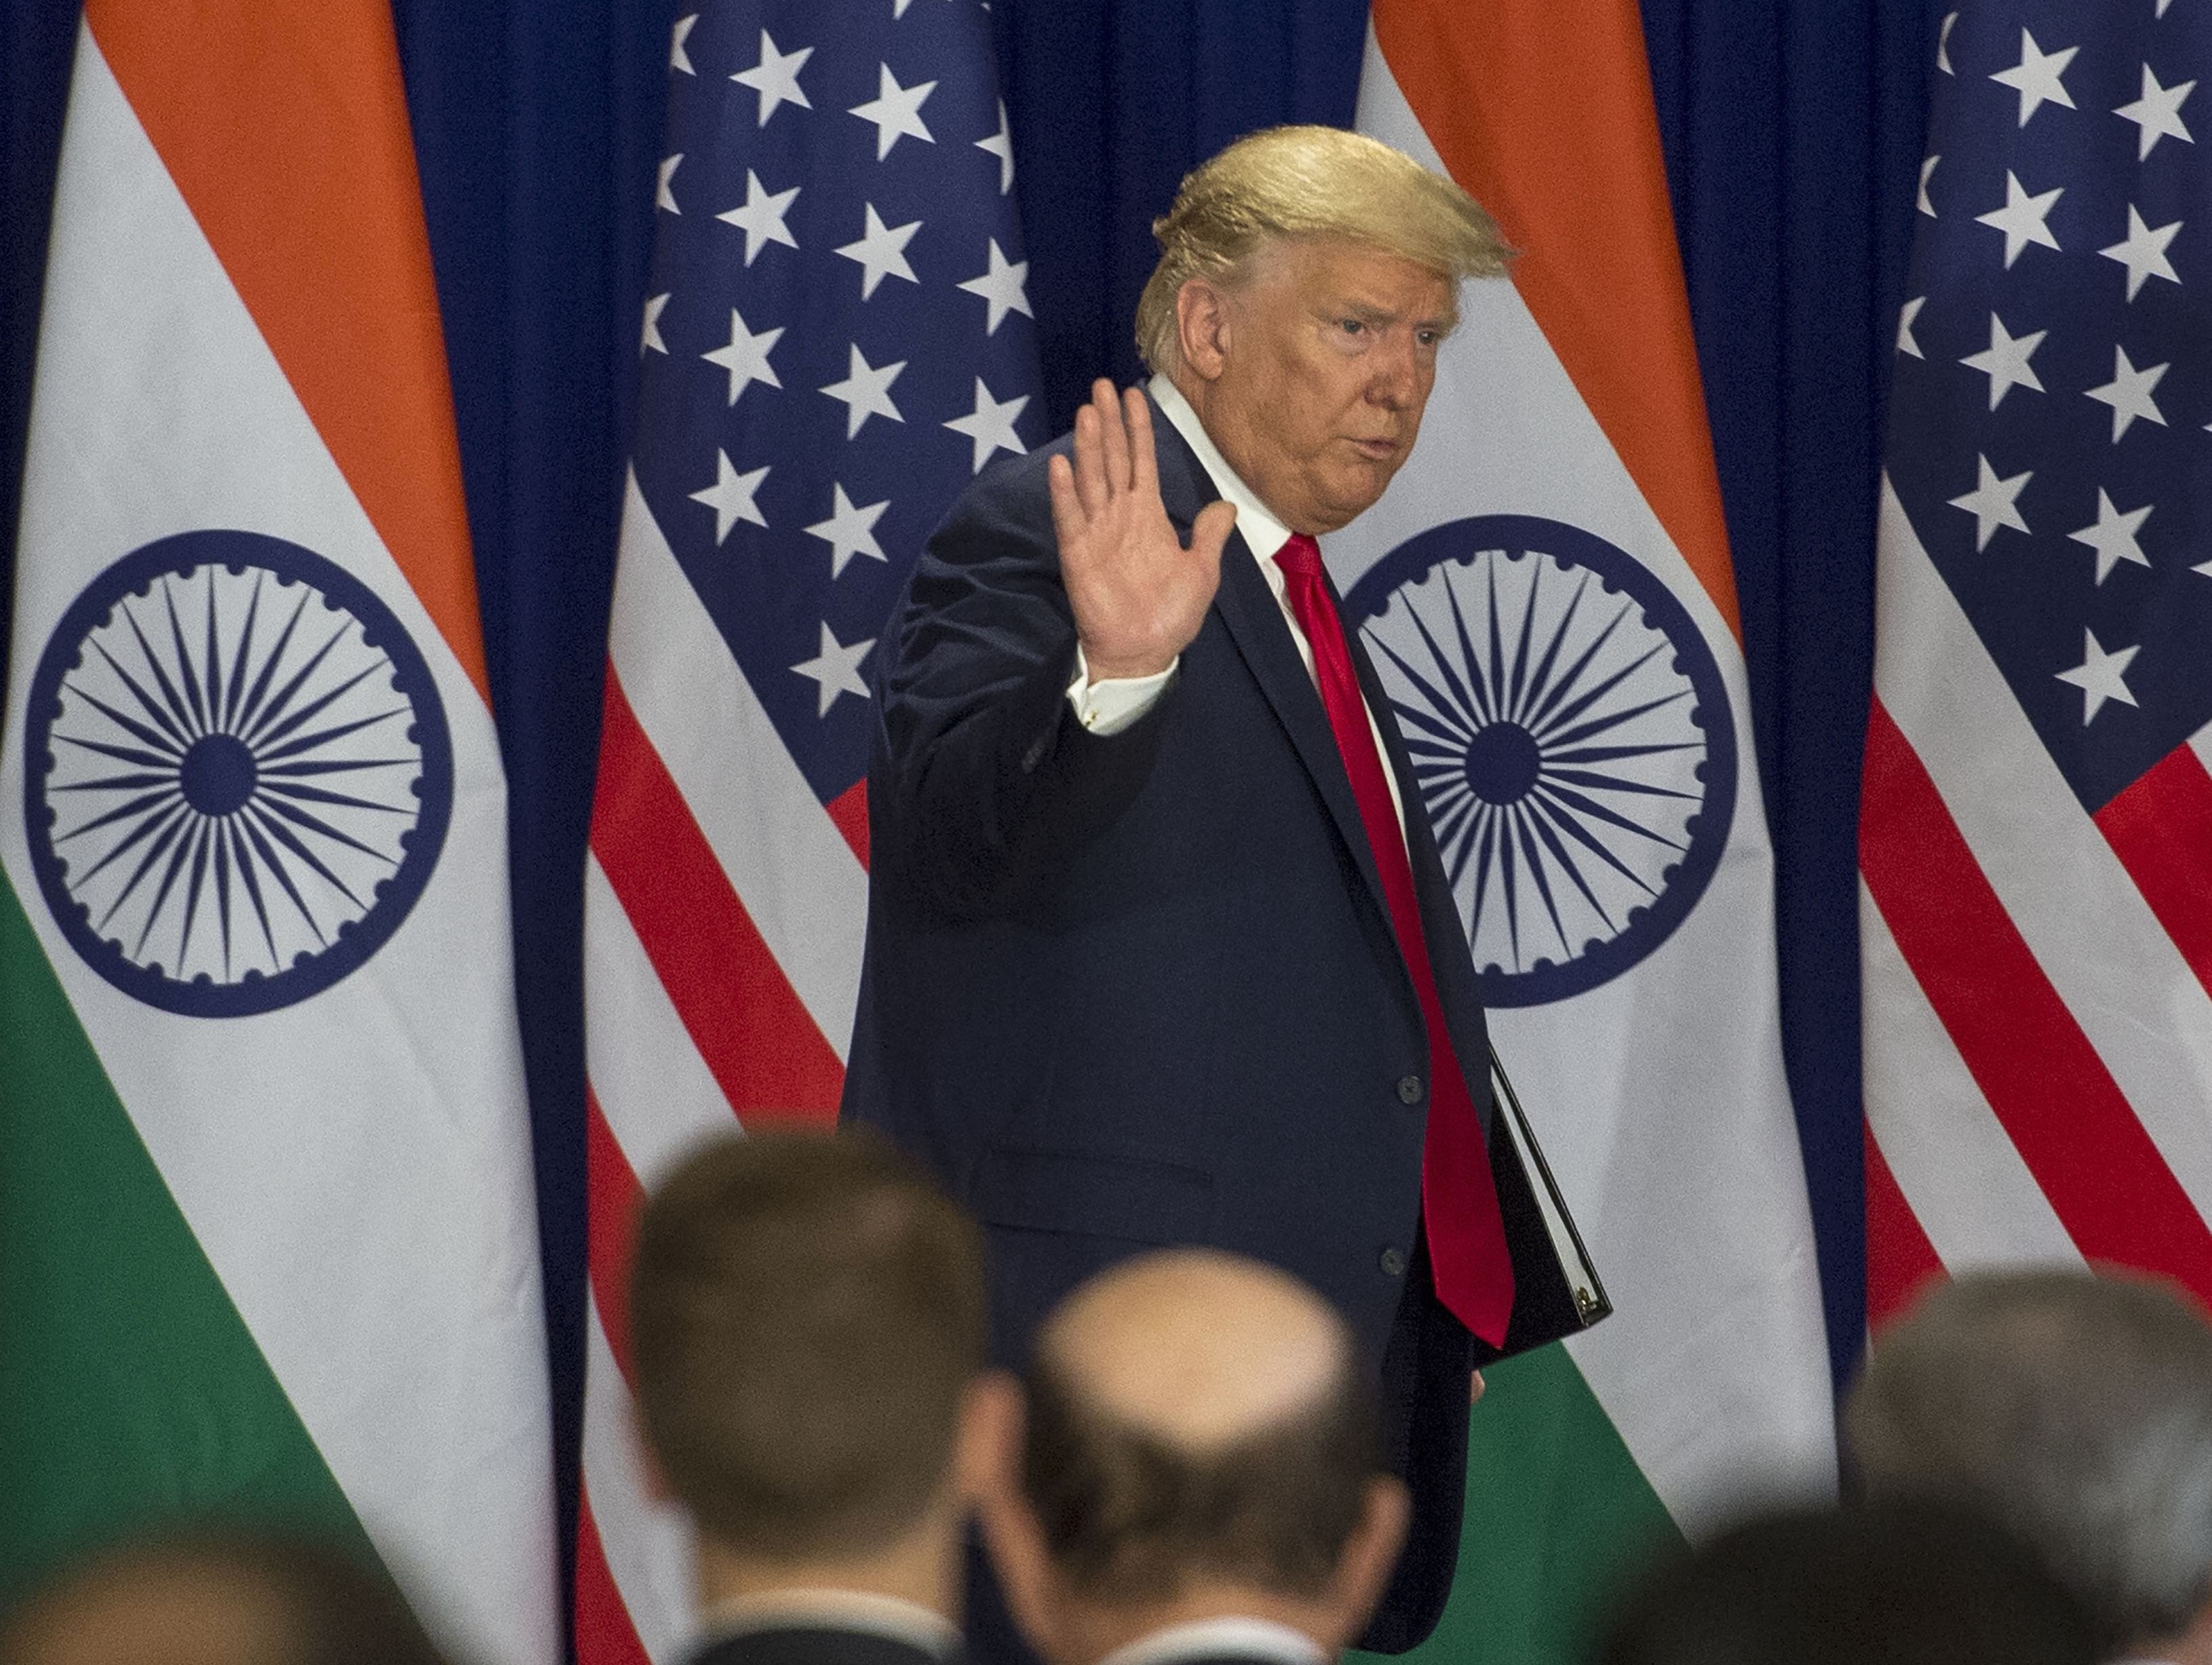 8 takeaways from President Trump’s India visit you shouldn’t miss